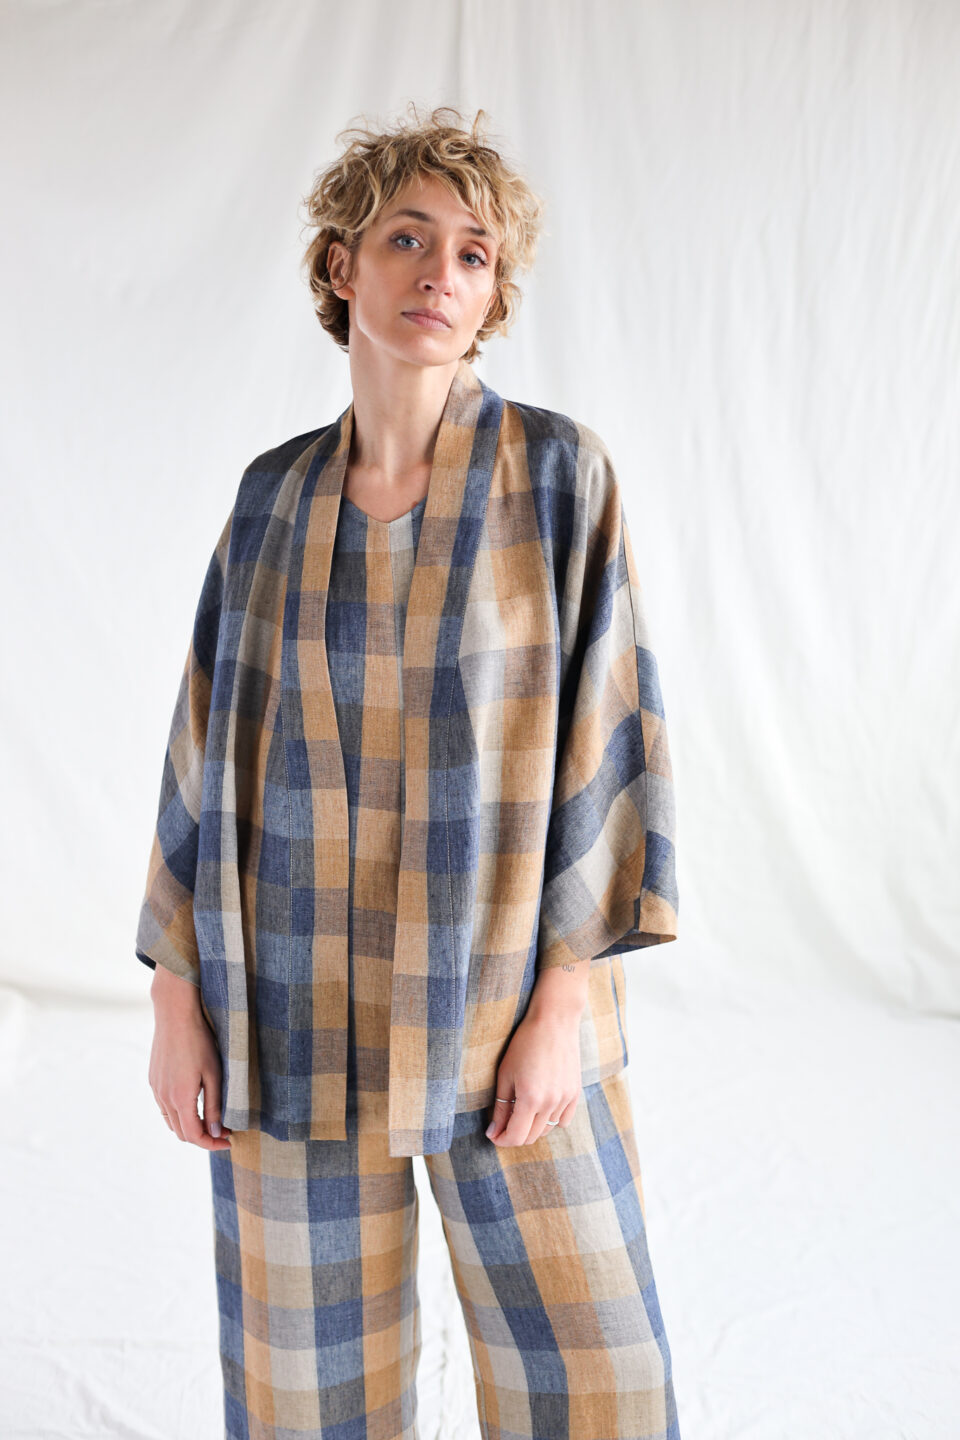 Linen kimono style jacket in blue multicolored checks | Dress | Sustainable clothing | OffOn clothing